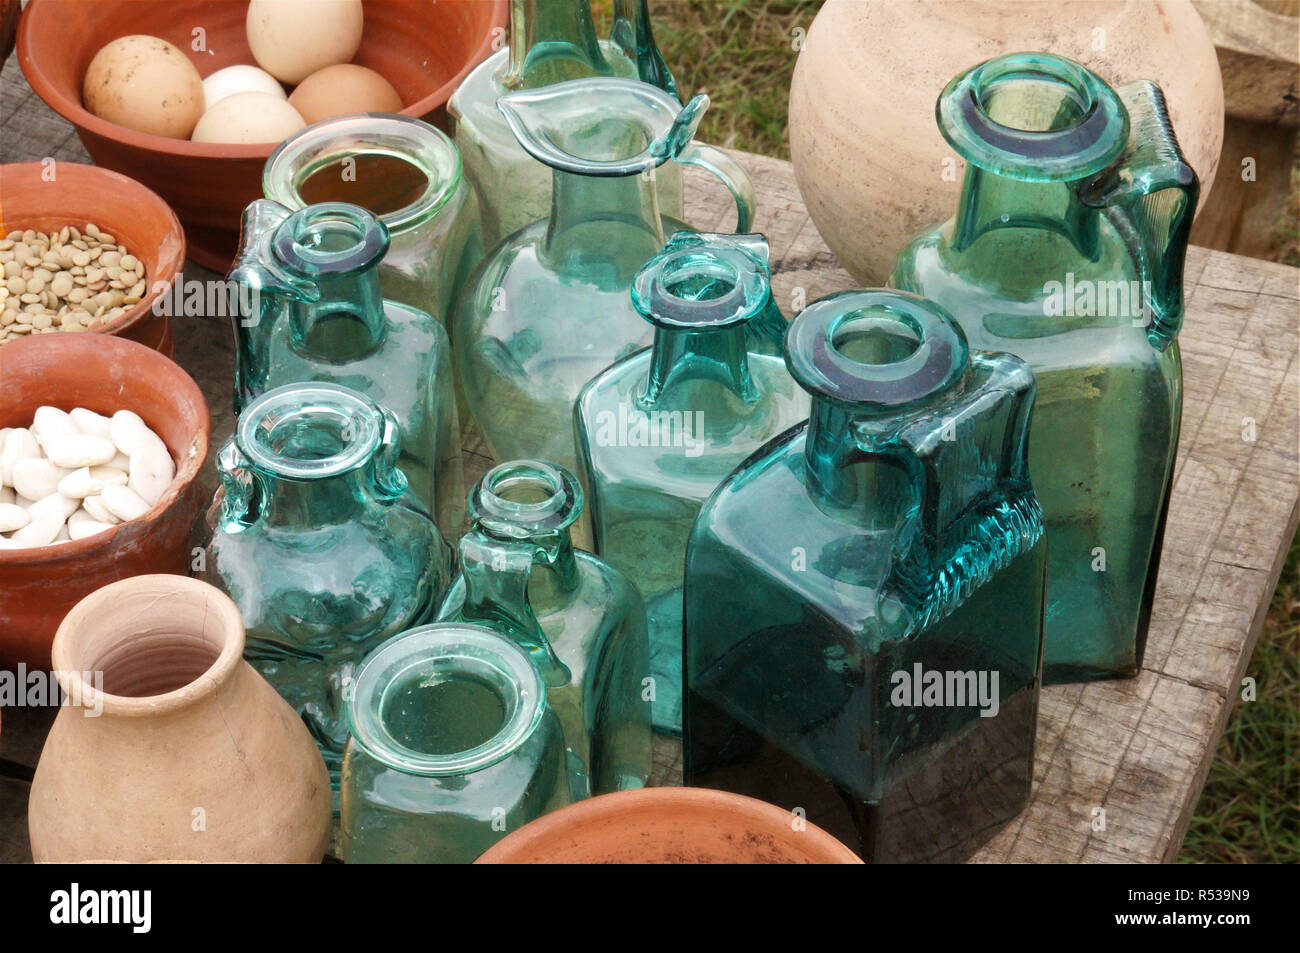 Roman glass jars and bottles to hold oils and sauces for cooking. Stock Photo